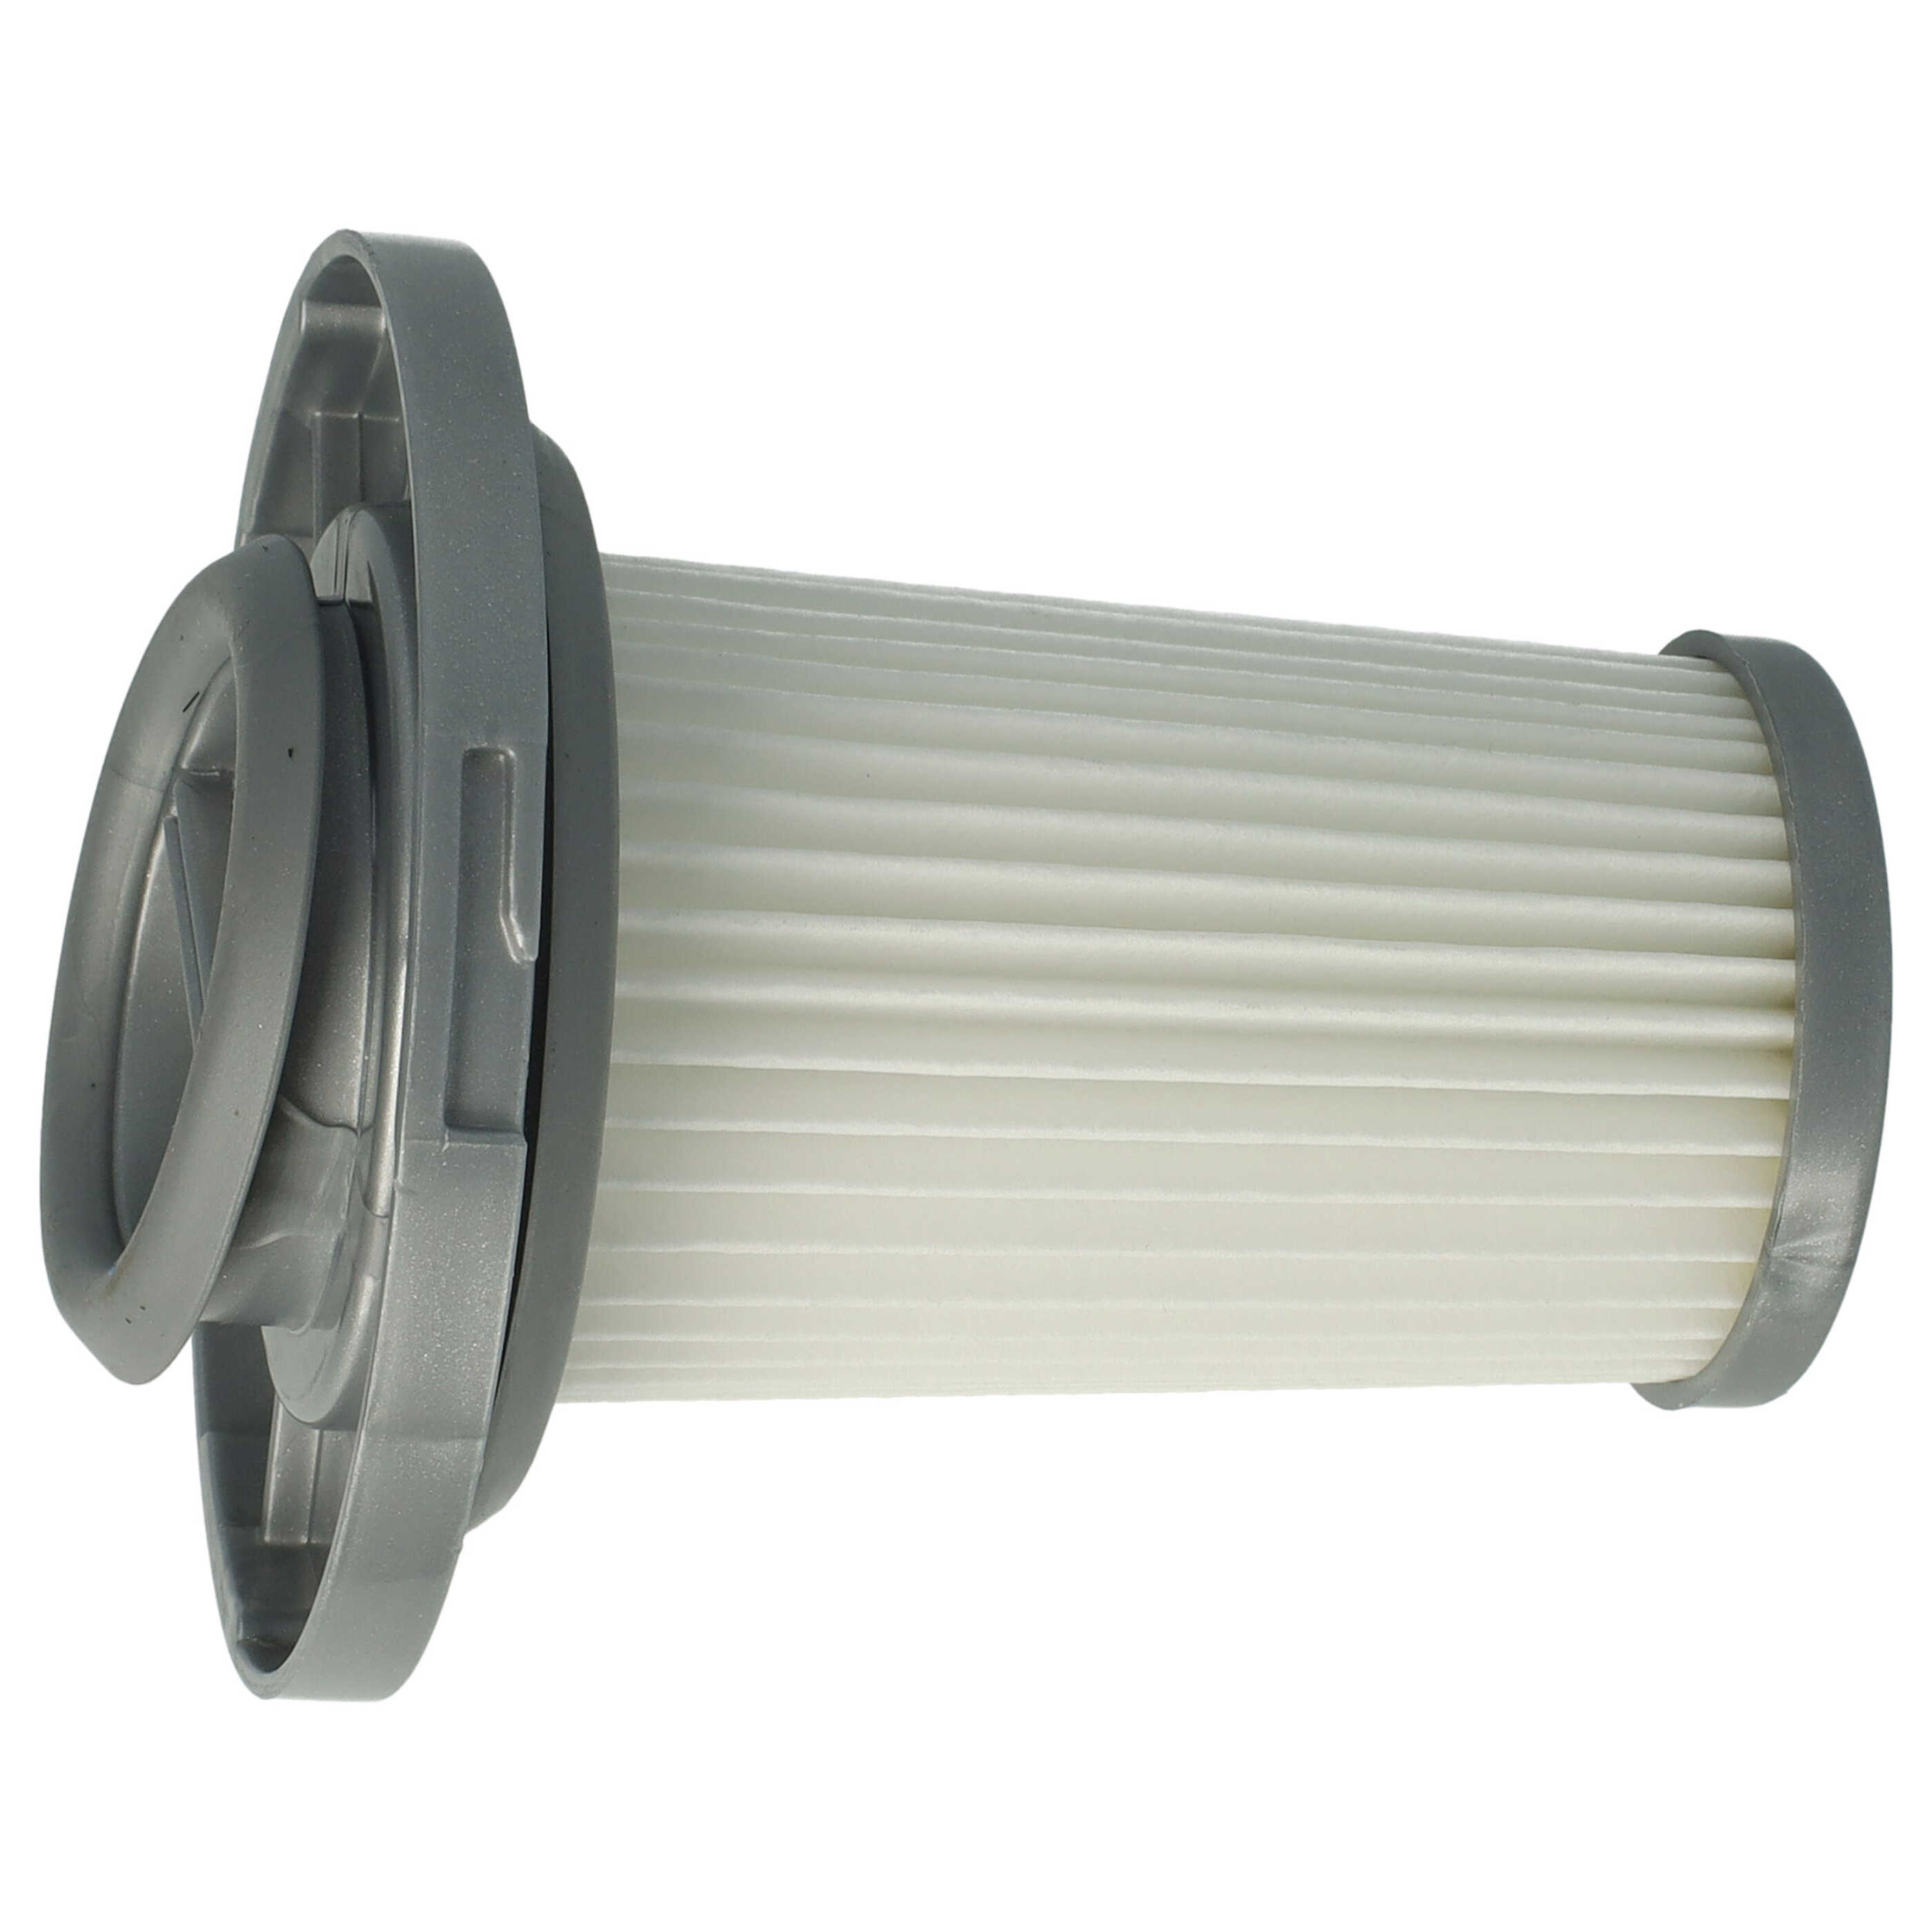 1x cartridge filter replaces Rowenta ZR009005 for TefalVacuum Cleaner